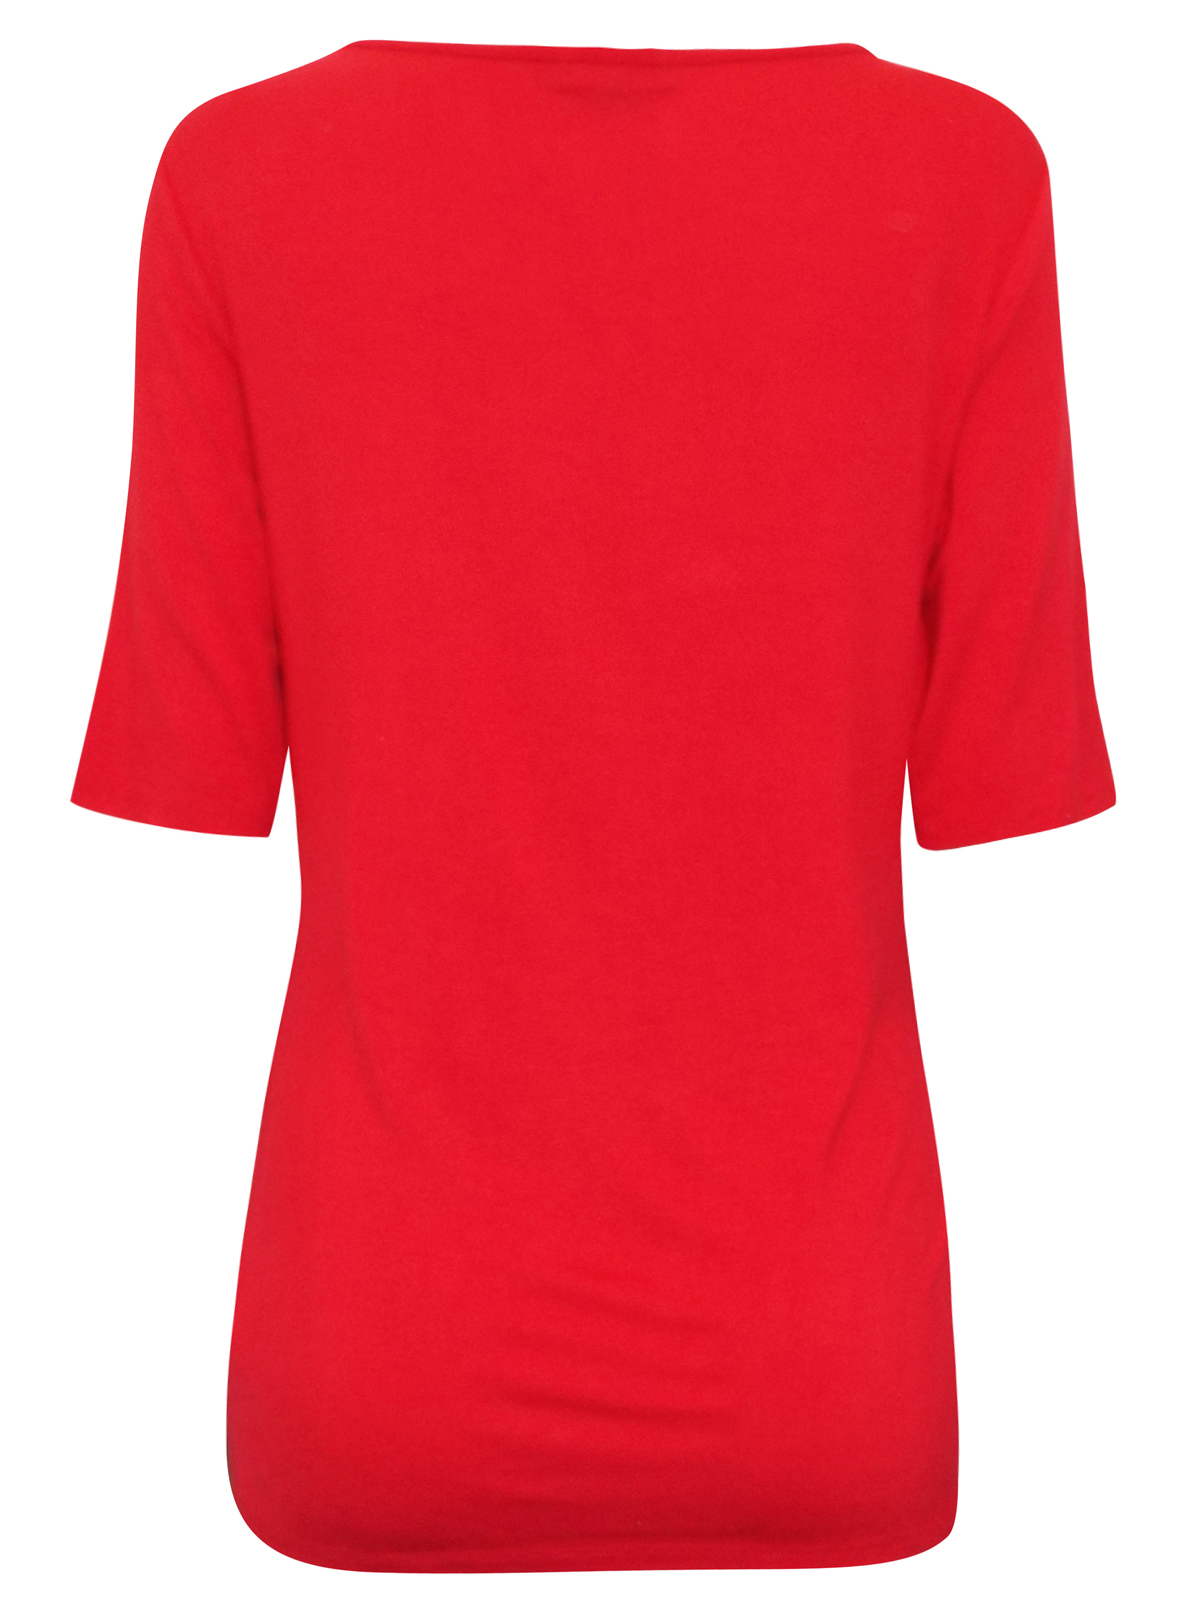 First Avenue RED Half Sleeve Jersey Top - Size 12 to 20